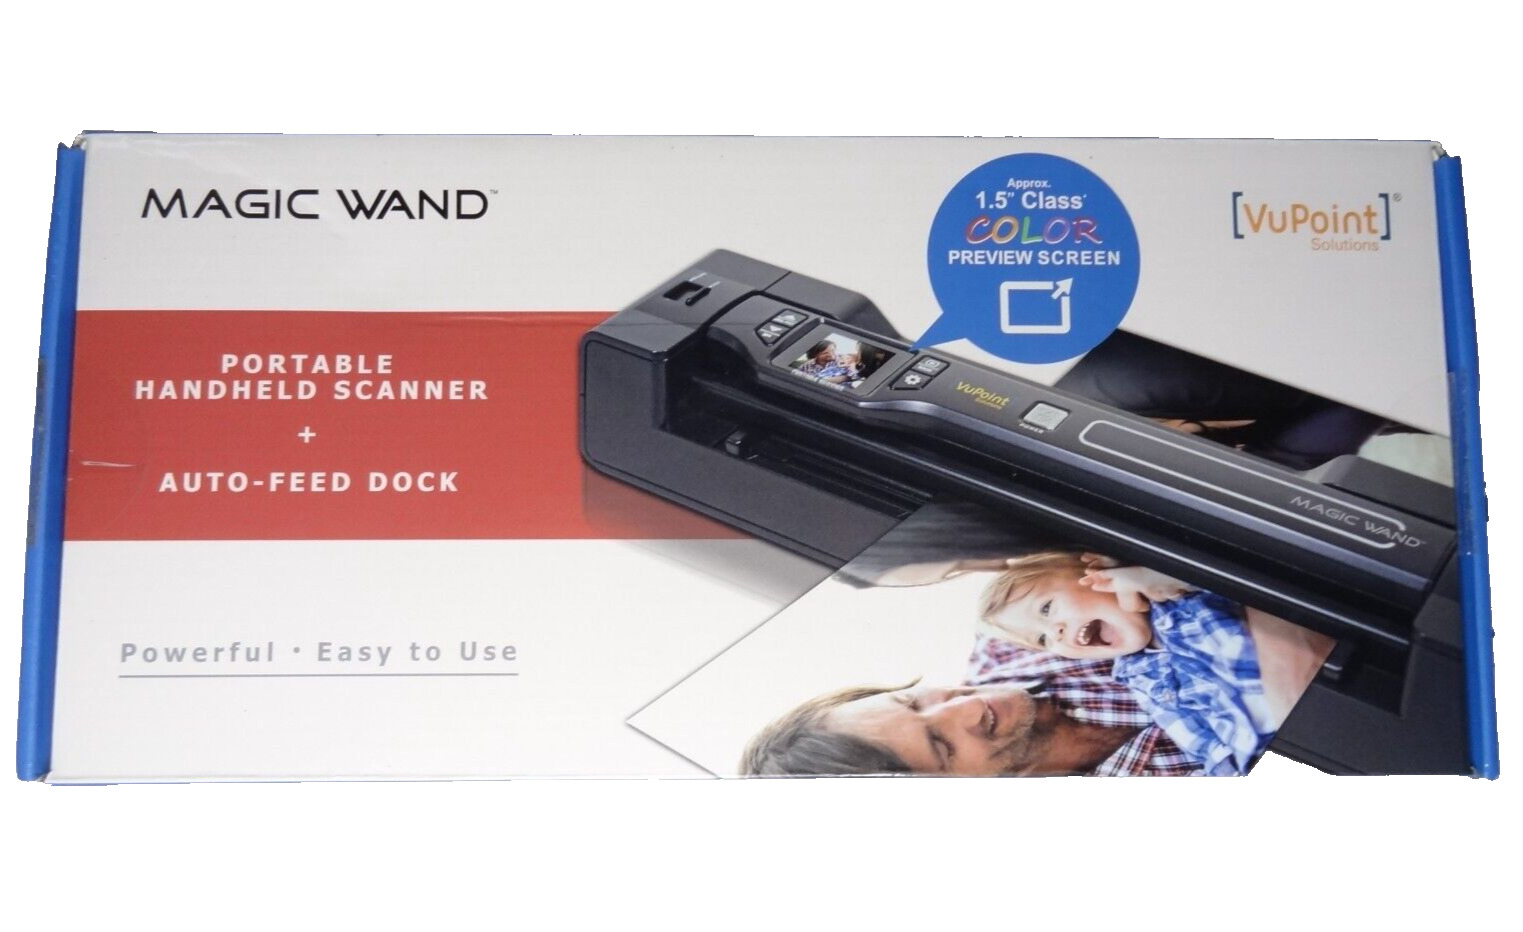 VuPoint Magic Wand Portable Handheld Scanner Auto-Feed Dock PDSDK-ST470R-VP Red